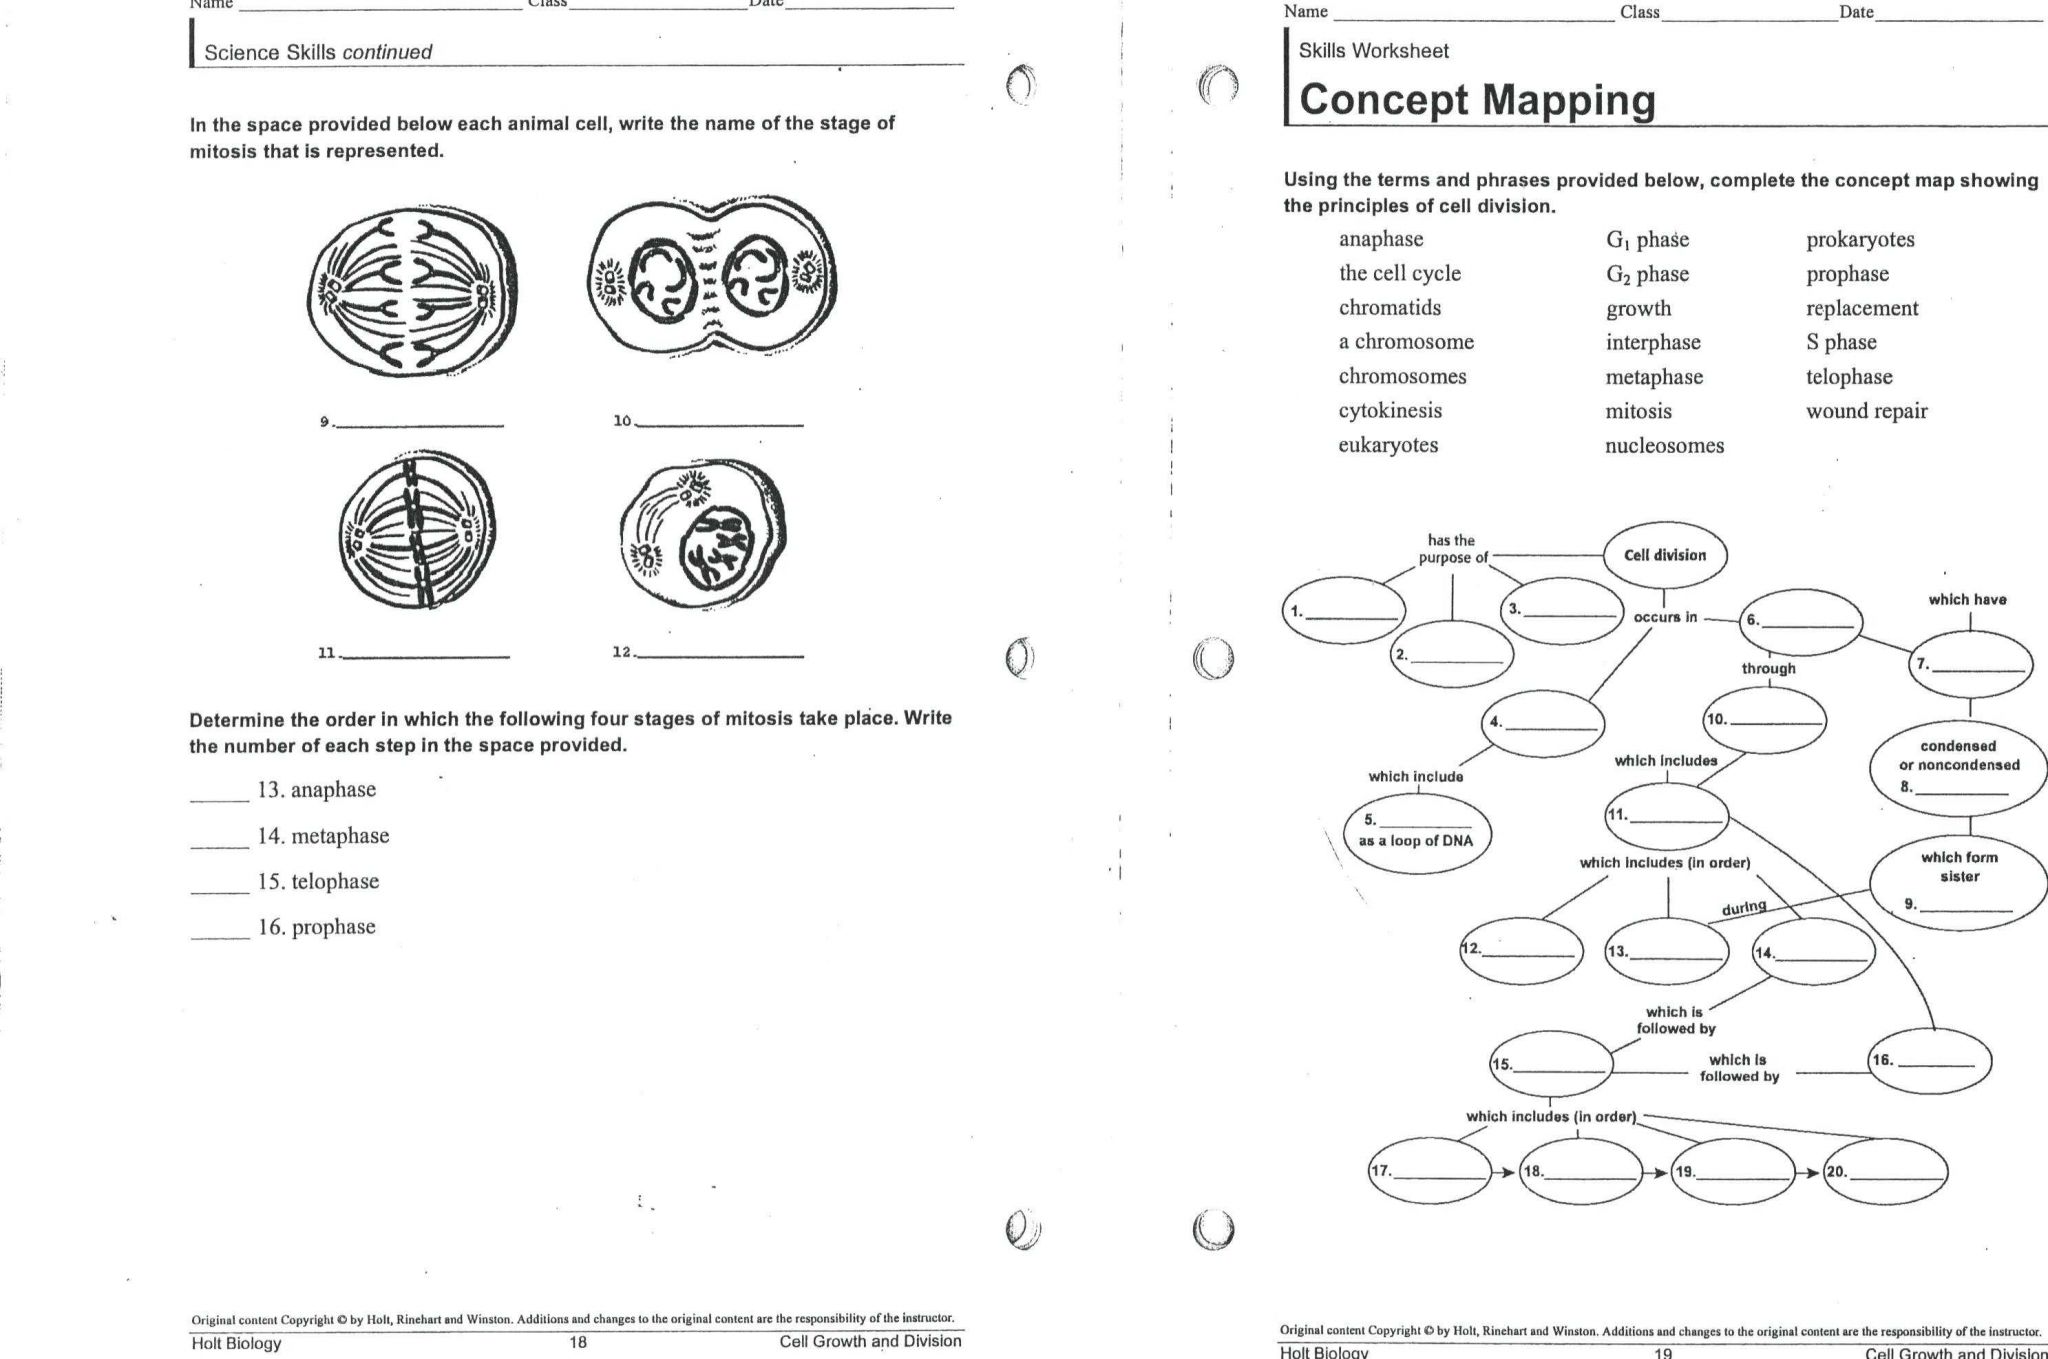 The Cell Cycle Coloring Worksheet Answers together with Cell Cycle Worksheet Answers Biology Unique Mitosis Phases Diagram